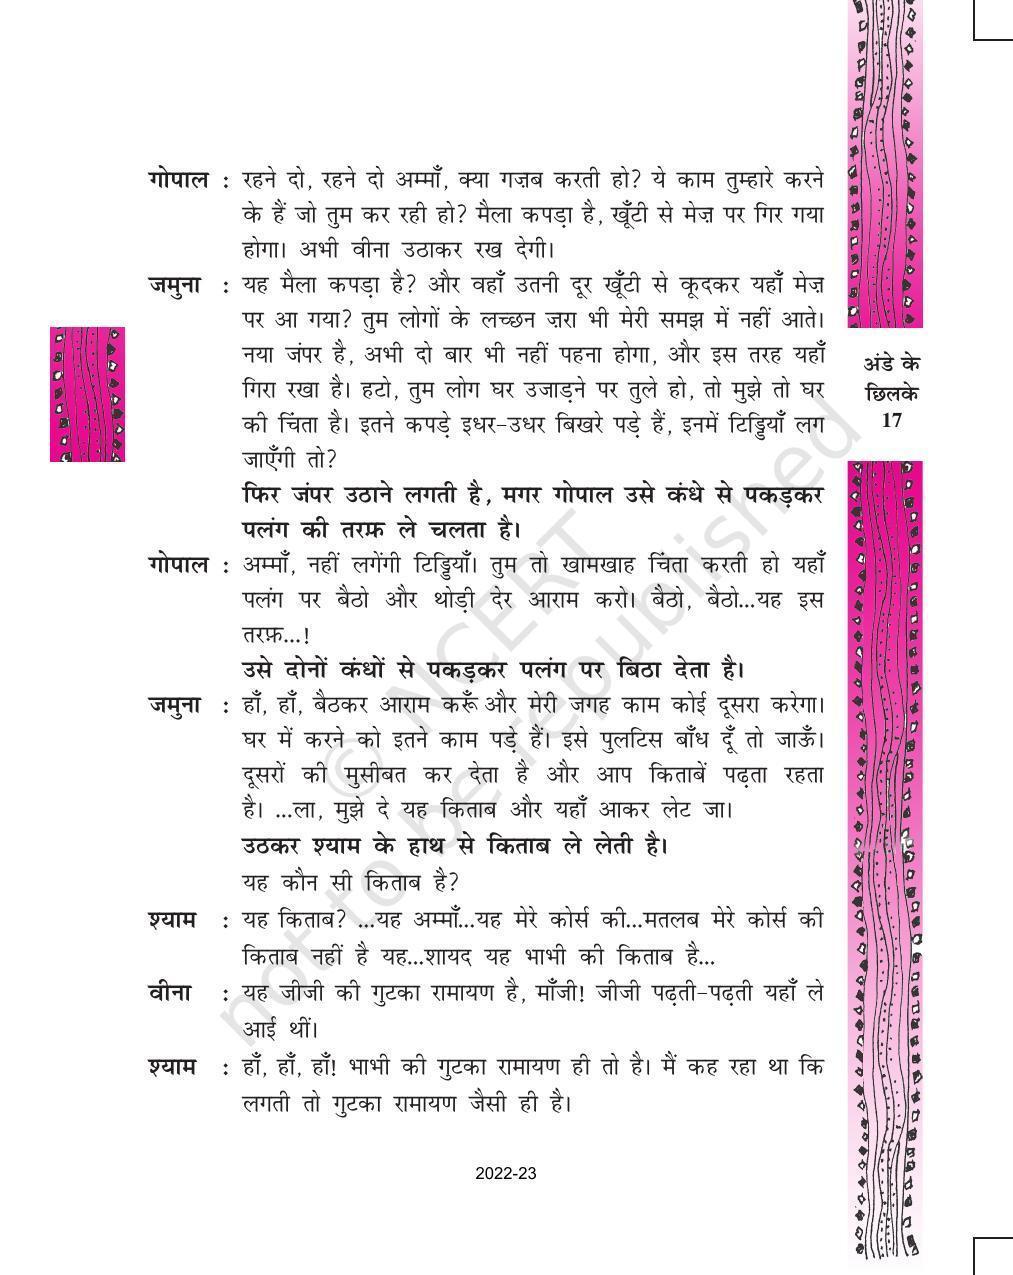 NCERT Book for Class 11 Hindi Antral Chapter 1 अंडे के छिलके - Page 17